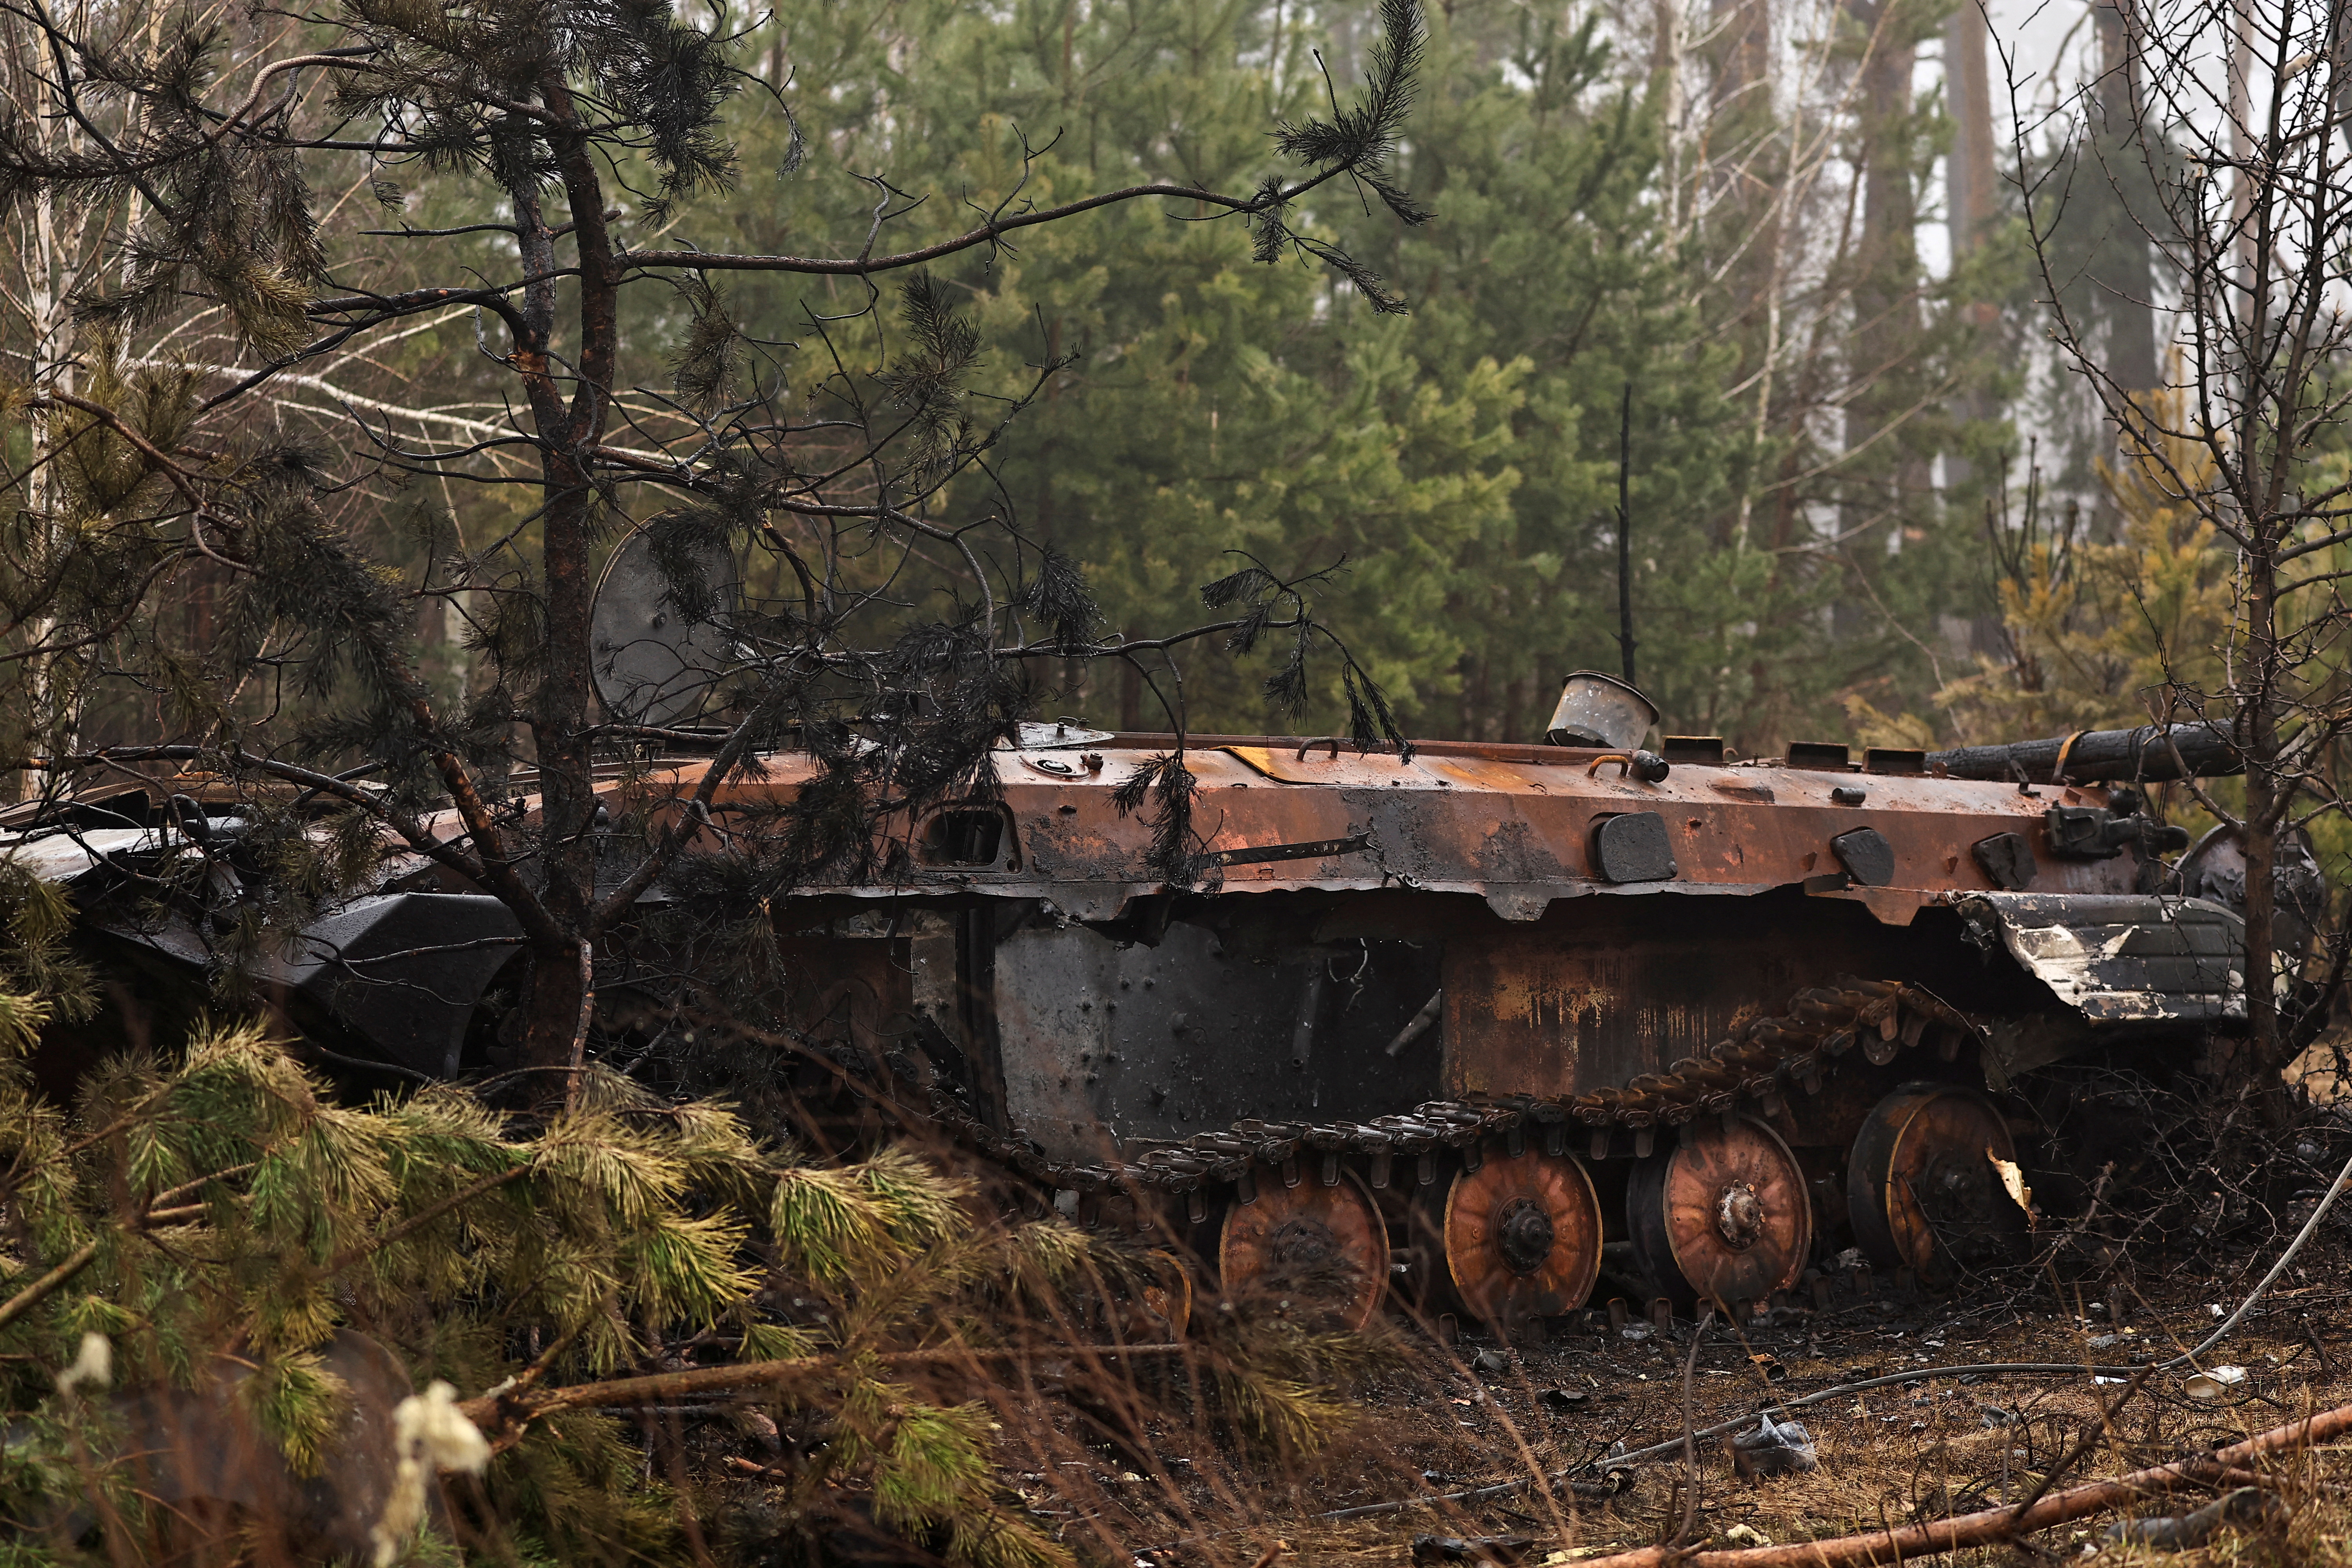 A view of destroyed Russian tank, in Dmytrivka village